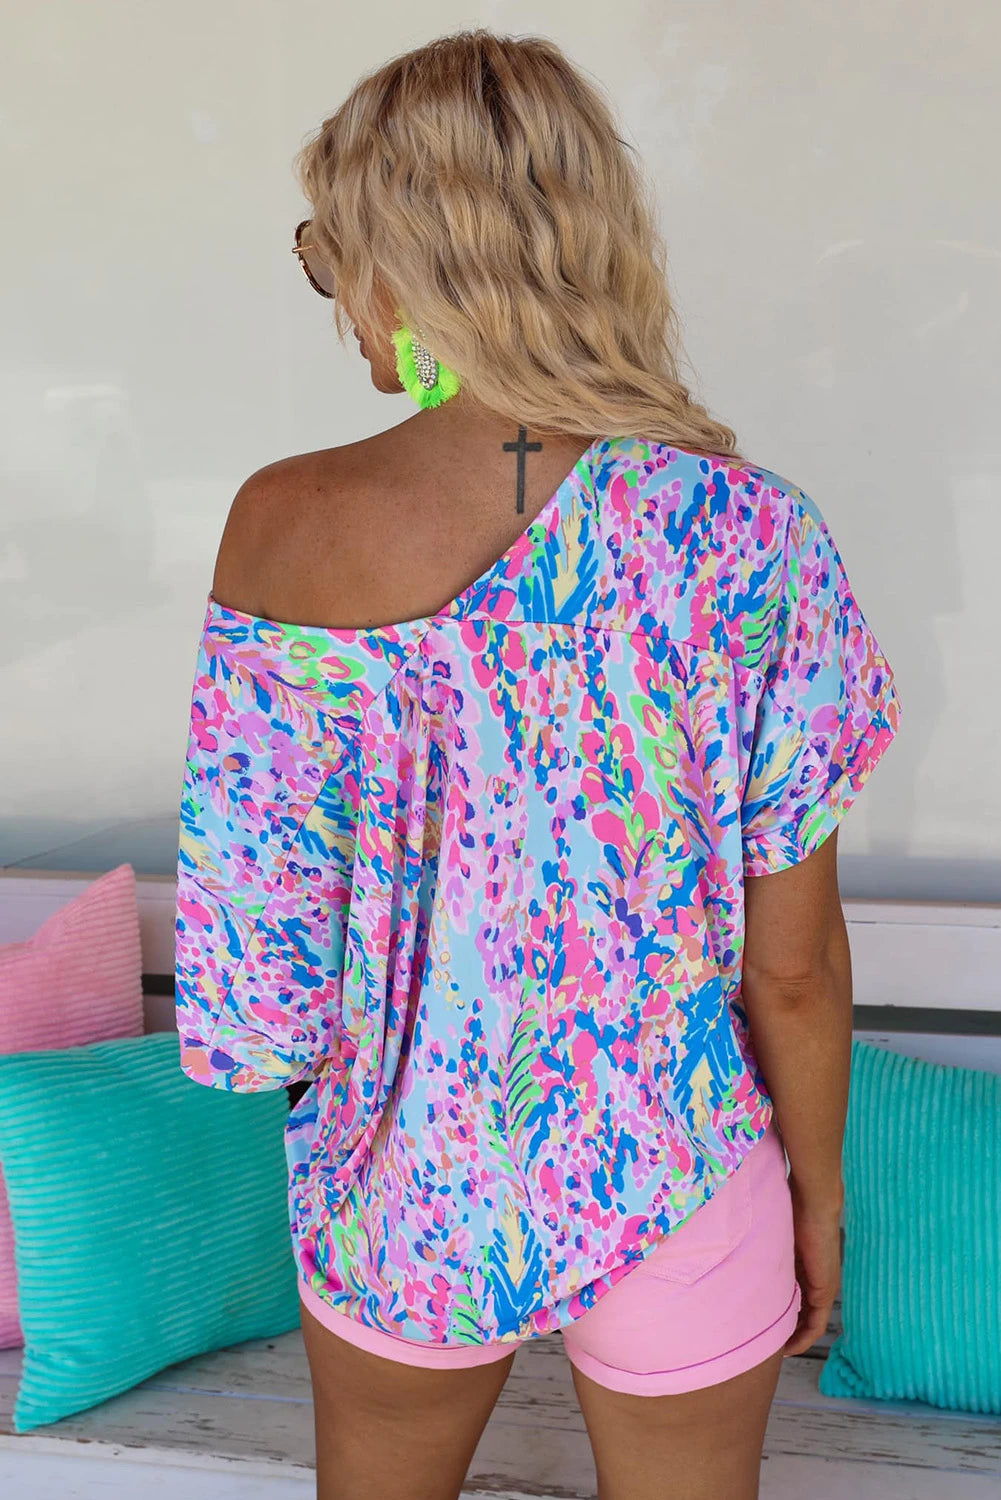 WOMAN WEARING A BRIGHT OFF THE SHOULDER SHIRT